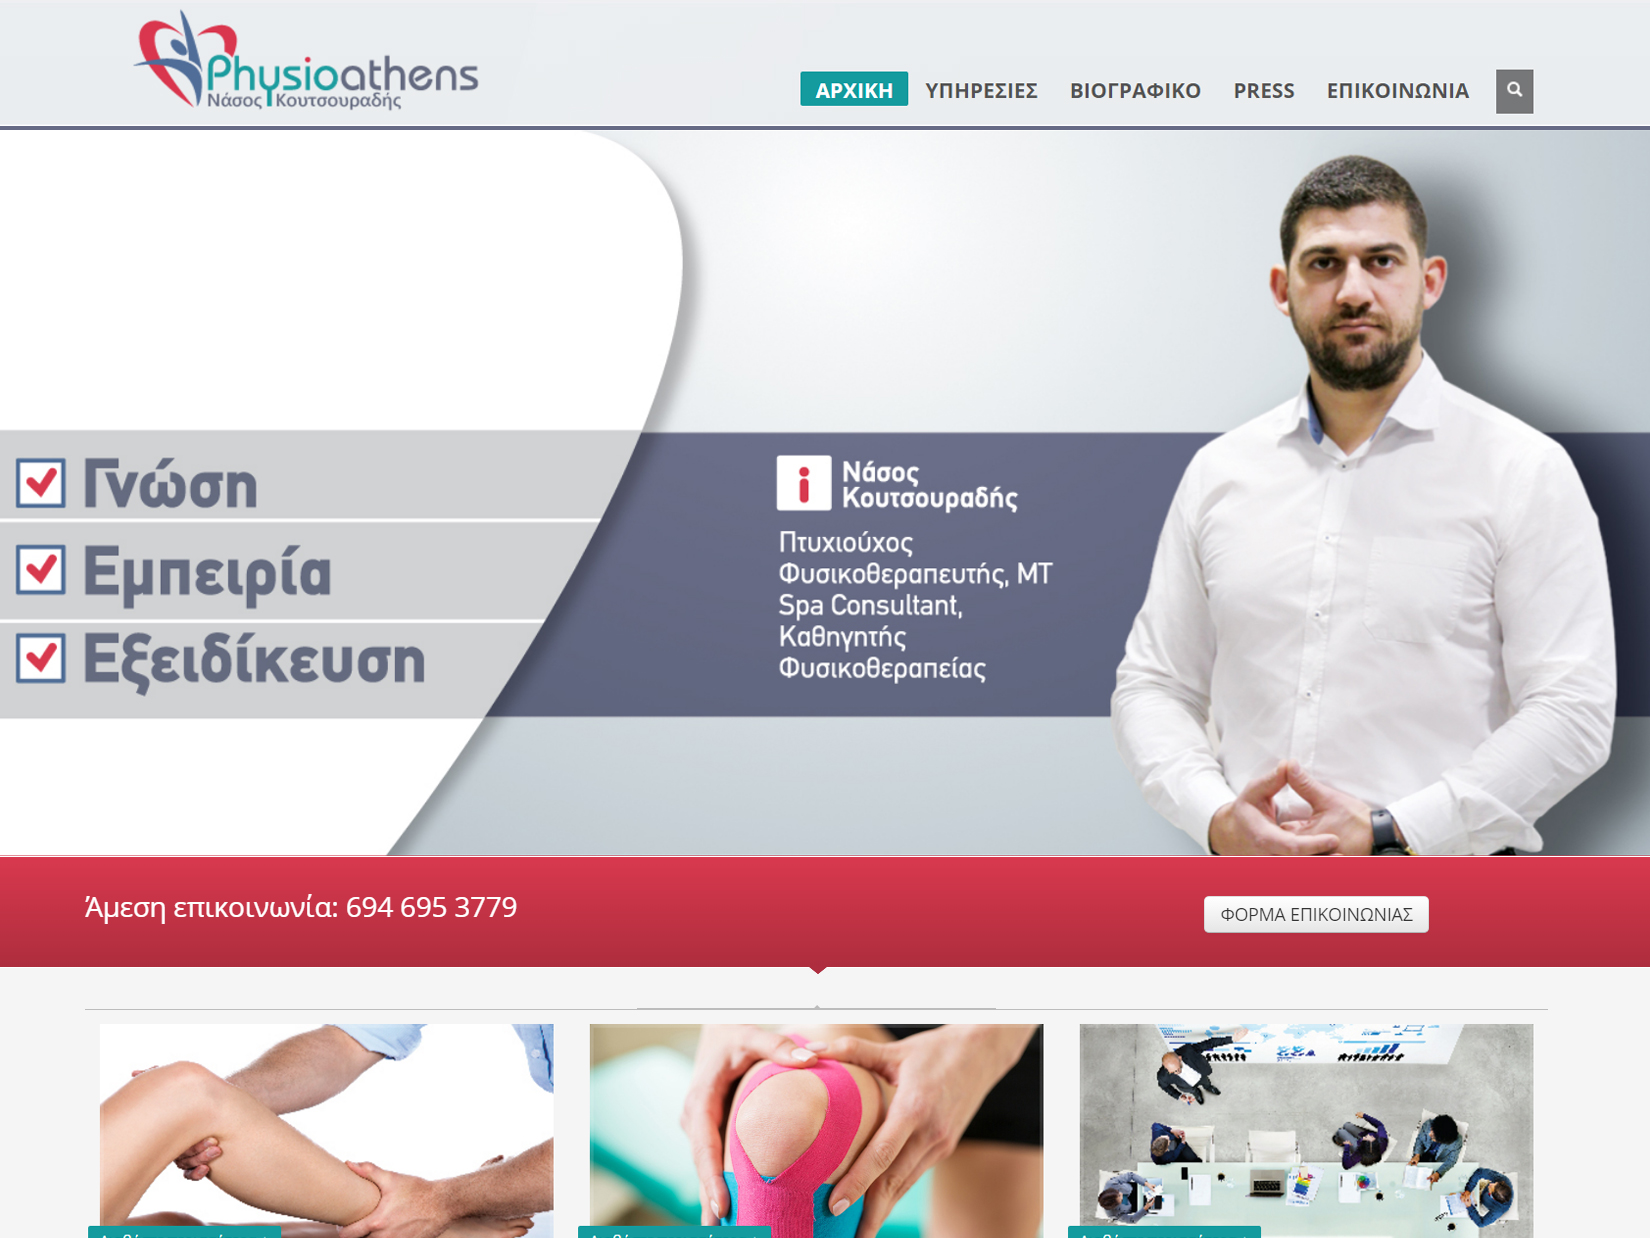 Physioathens.gr